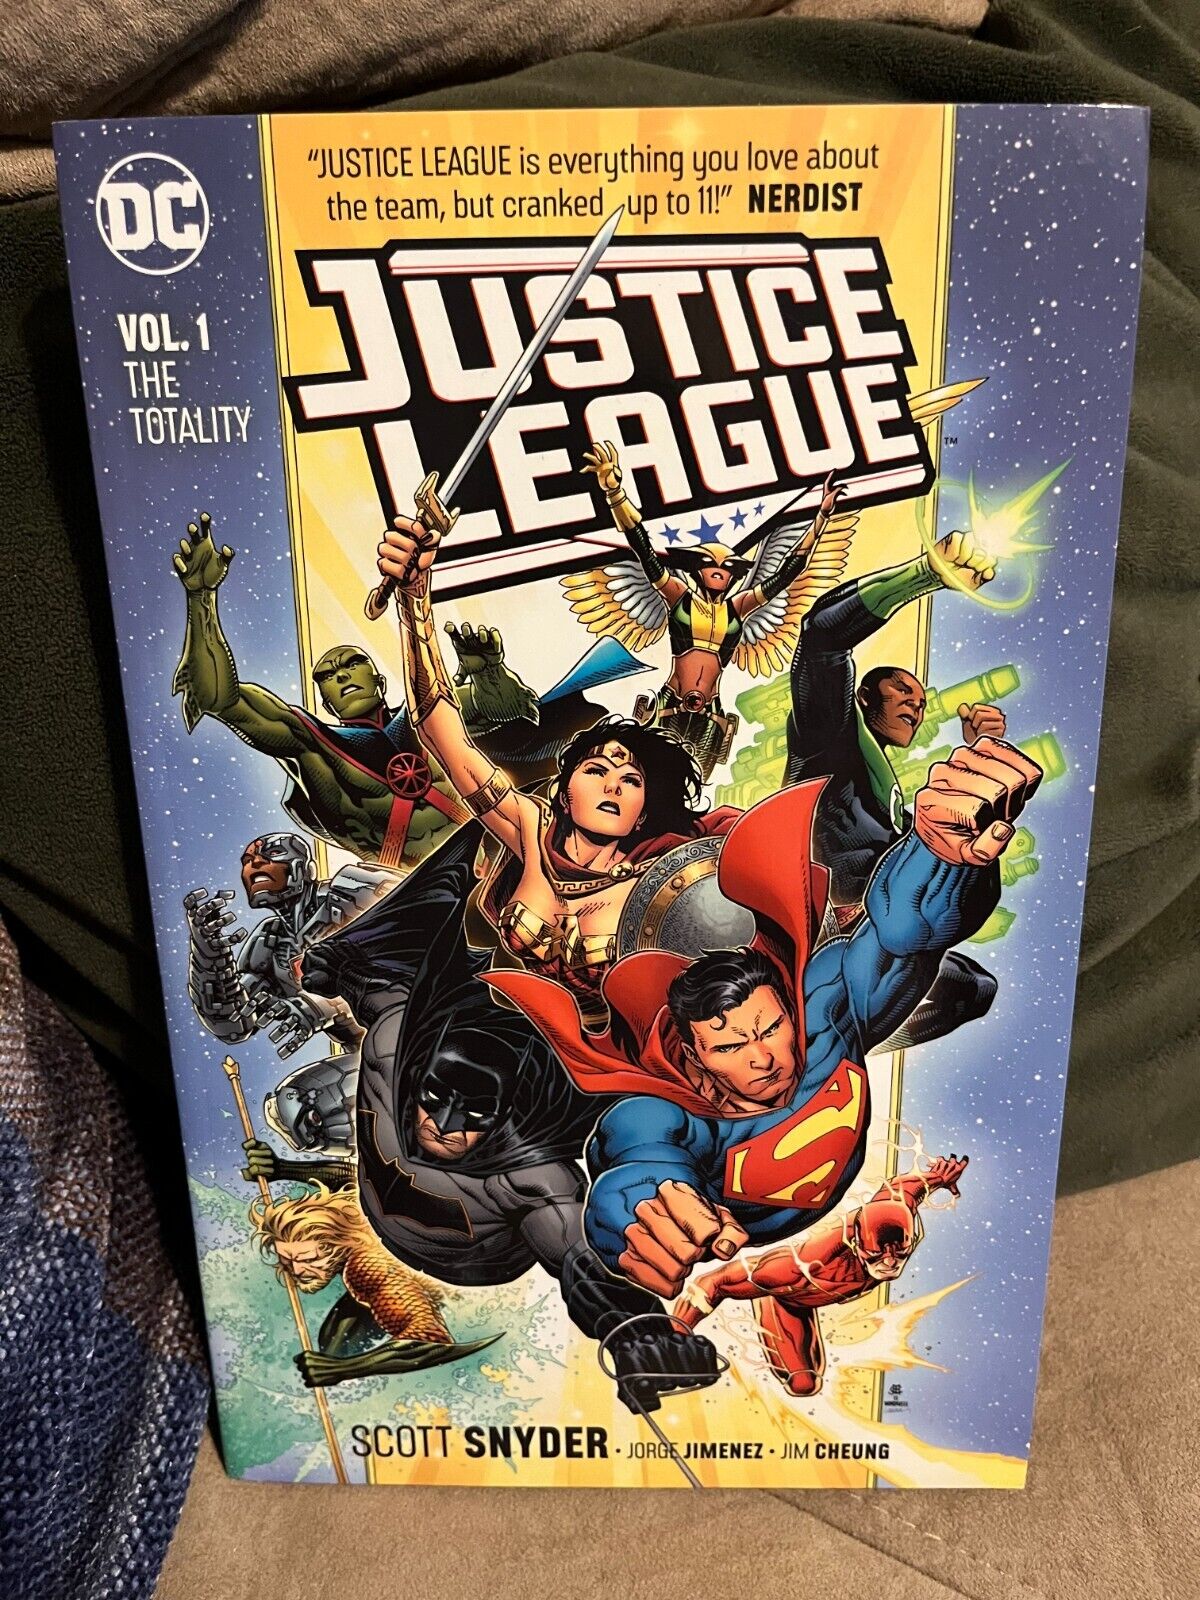 Justice League Vol. 1: The Totality by Snyder, Jiminez & Cheung TPB